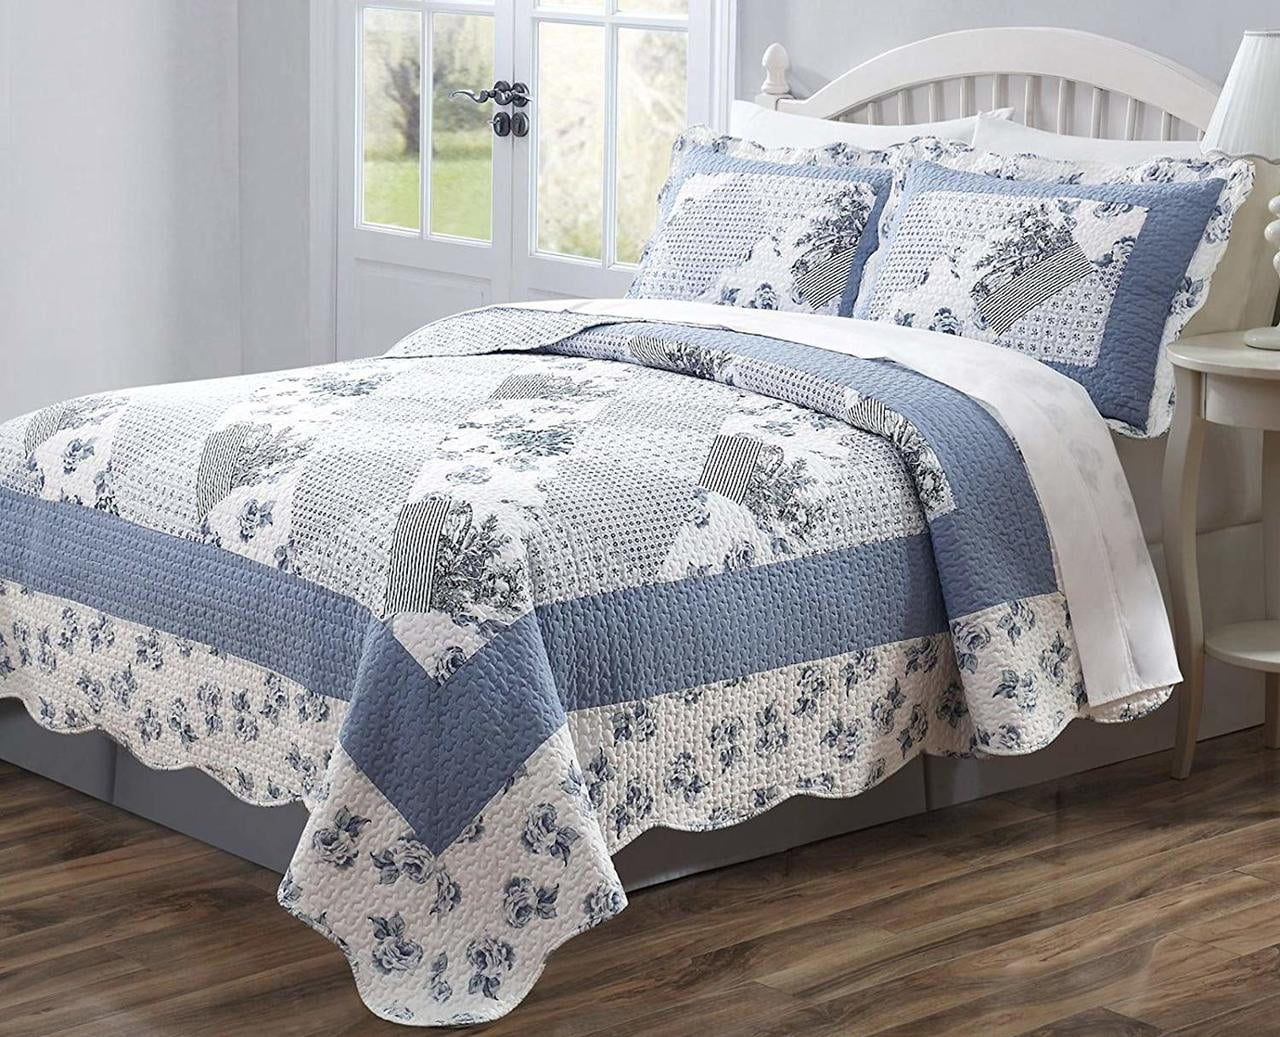 Decorative Bedroom Accessories super king bed Bedspread Bedding Double Bed New Printed Patchwork 3 Piece Bedspread Set Comforter Throw Set Blossom